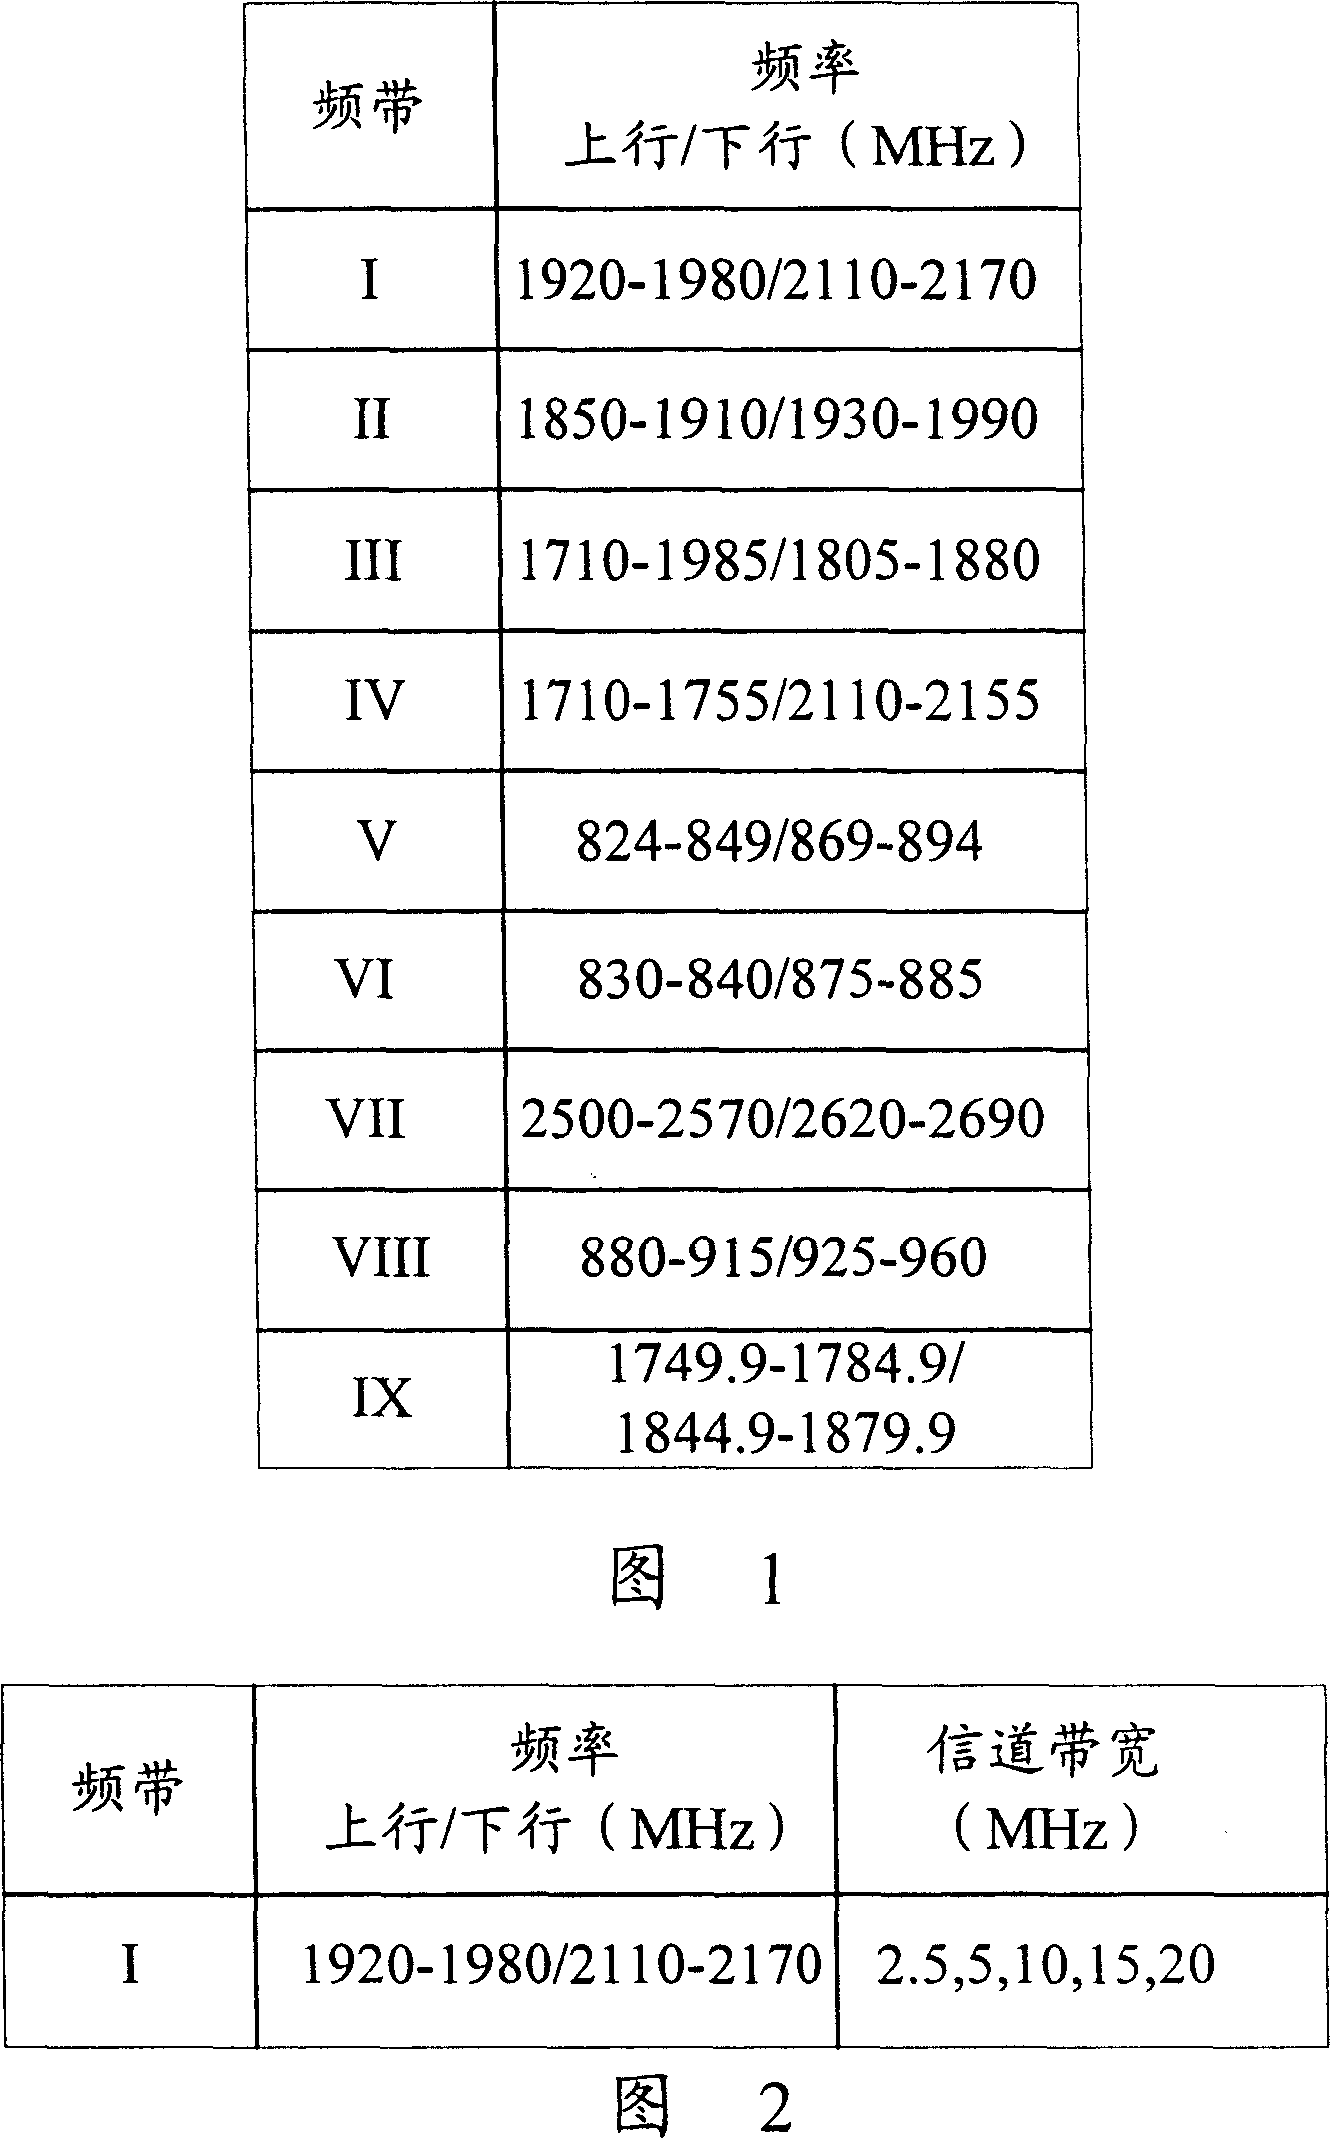 A method for access to wireless communication system of the terminal with different bandwidth capabilities